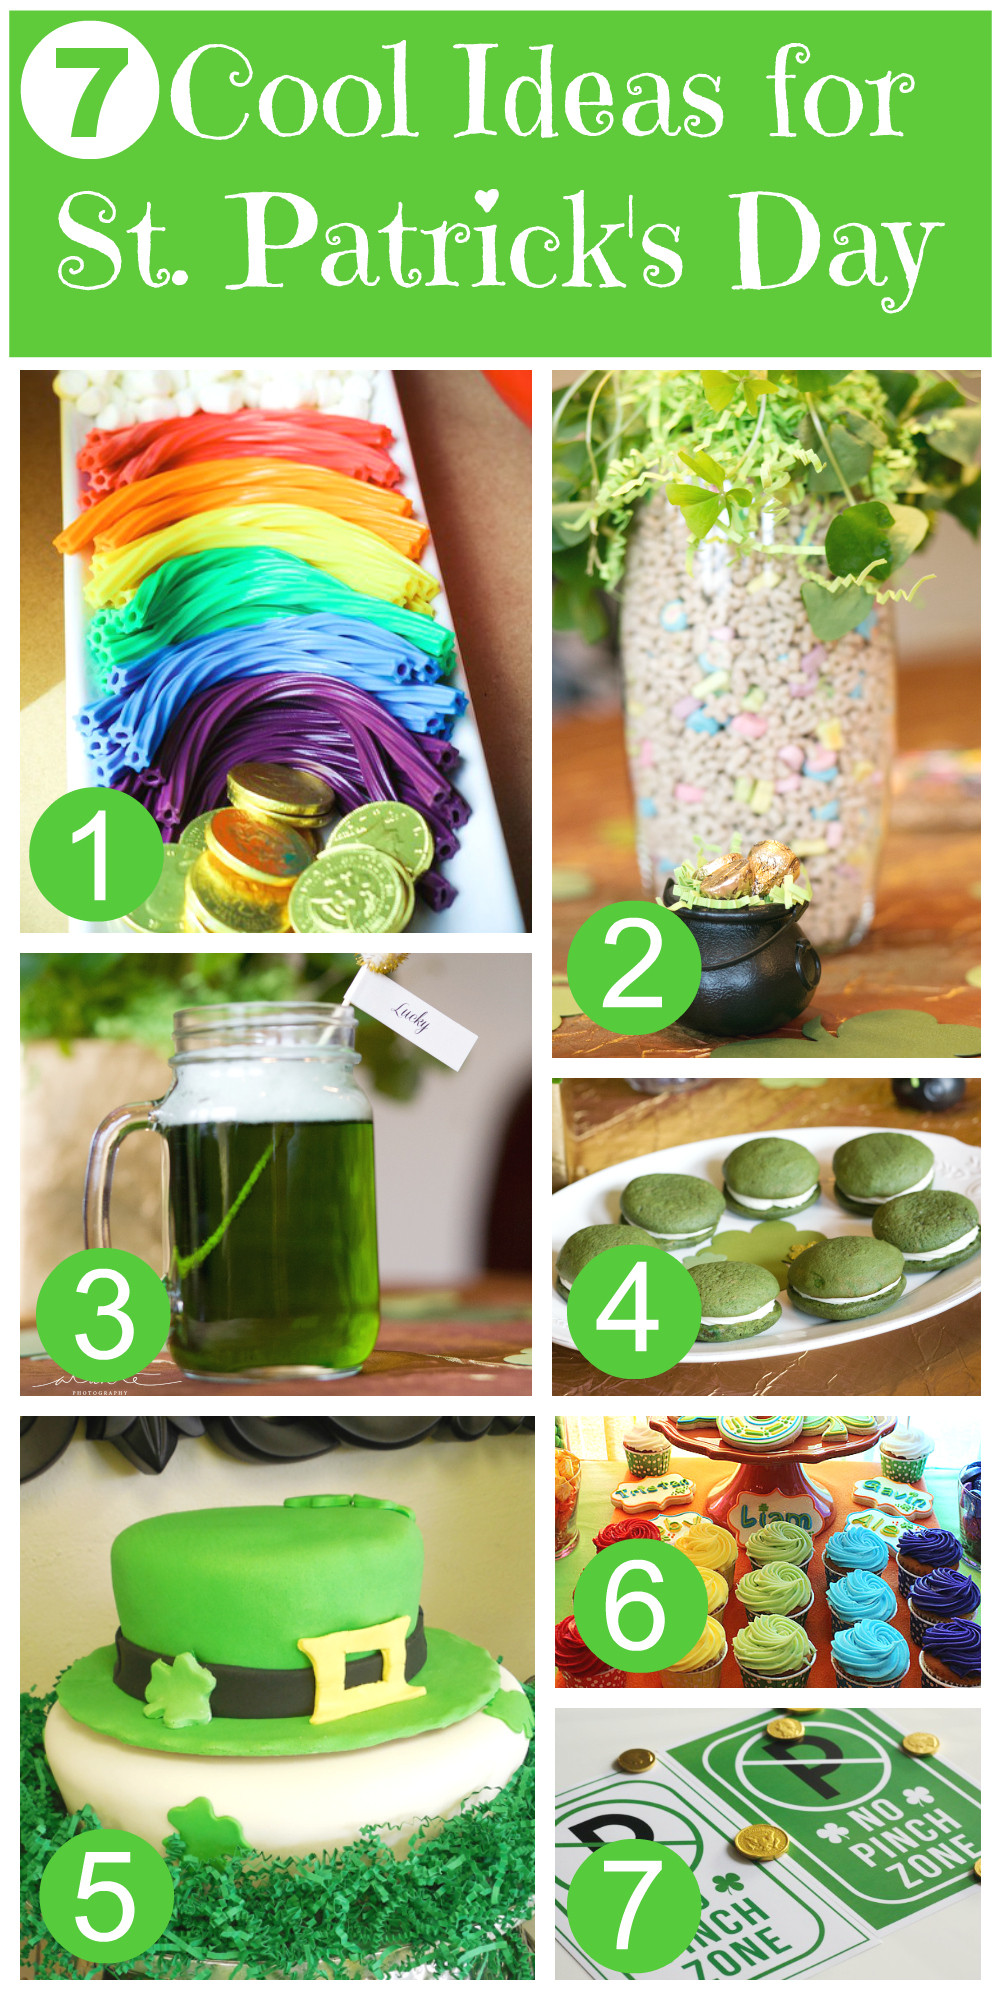 Ideas For St Patrick's Day Party
 7 Cool Party Ideas for St Patrick s Day